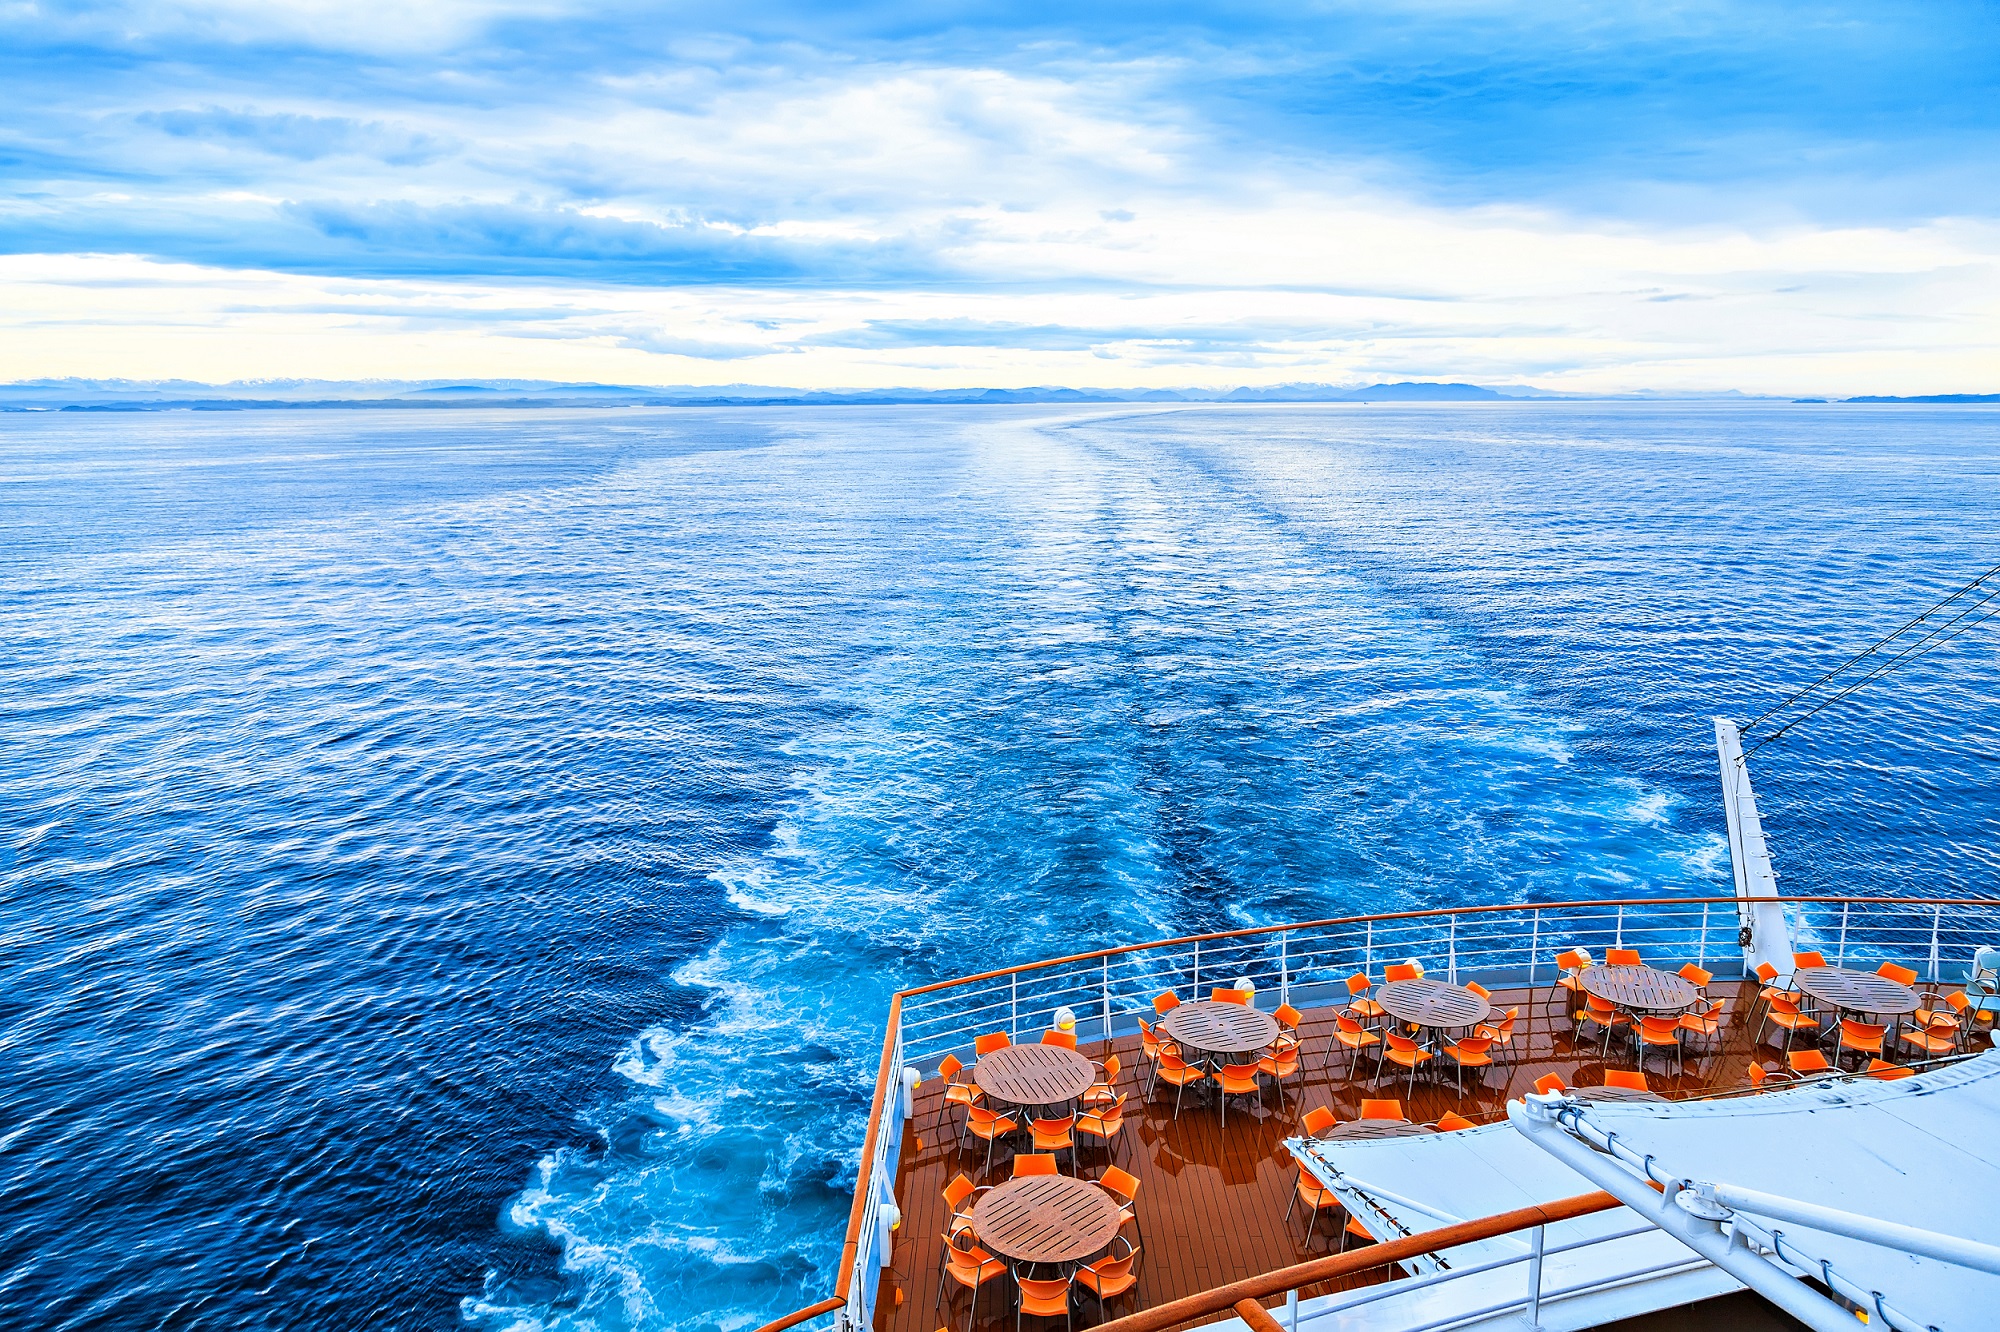 Travelling on a cruise on the ocean